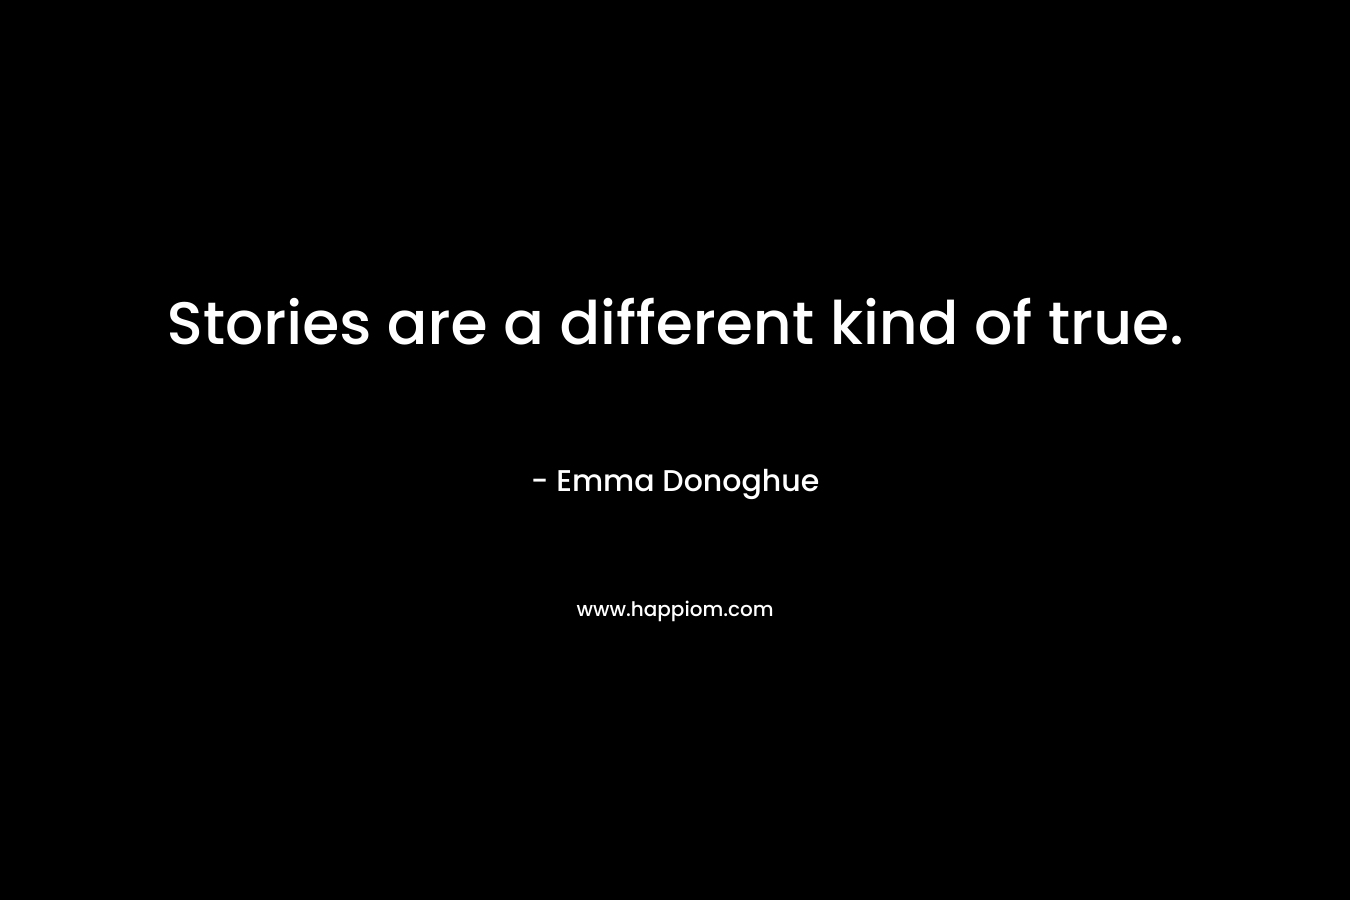 Stories are a different kind of true.